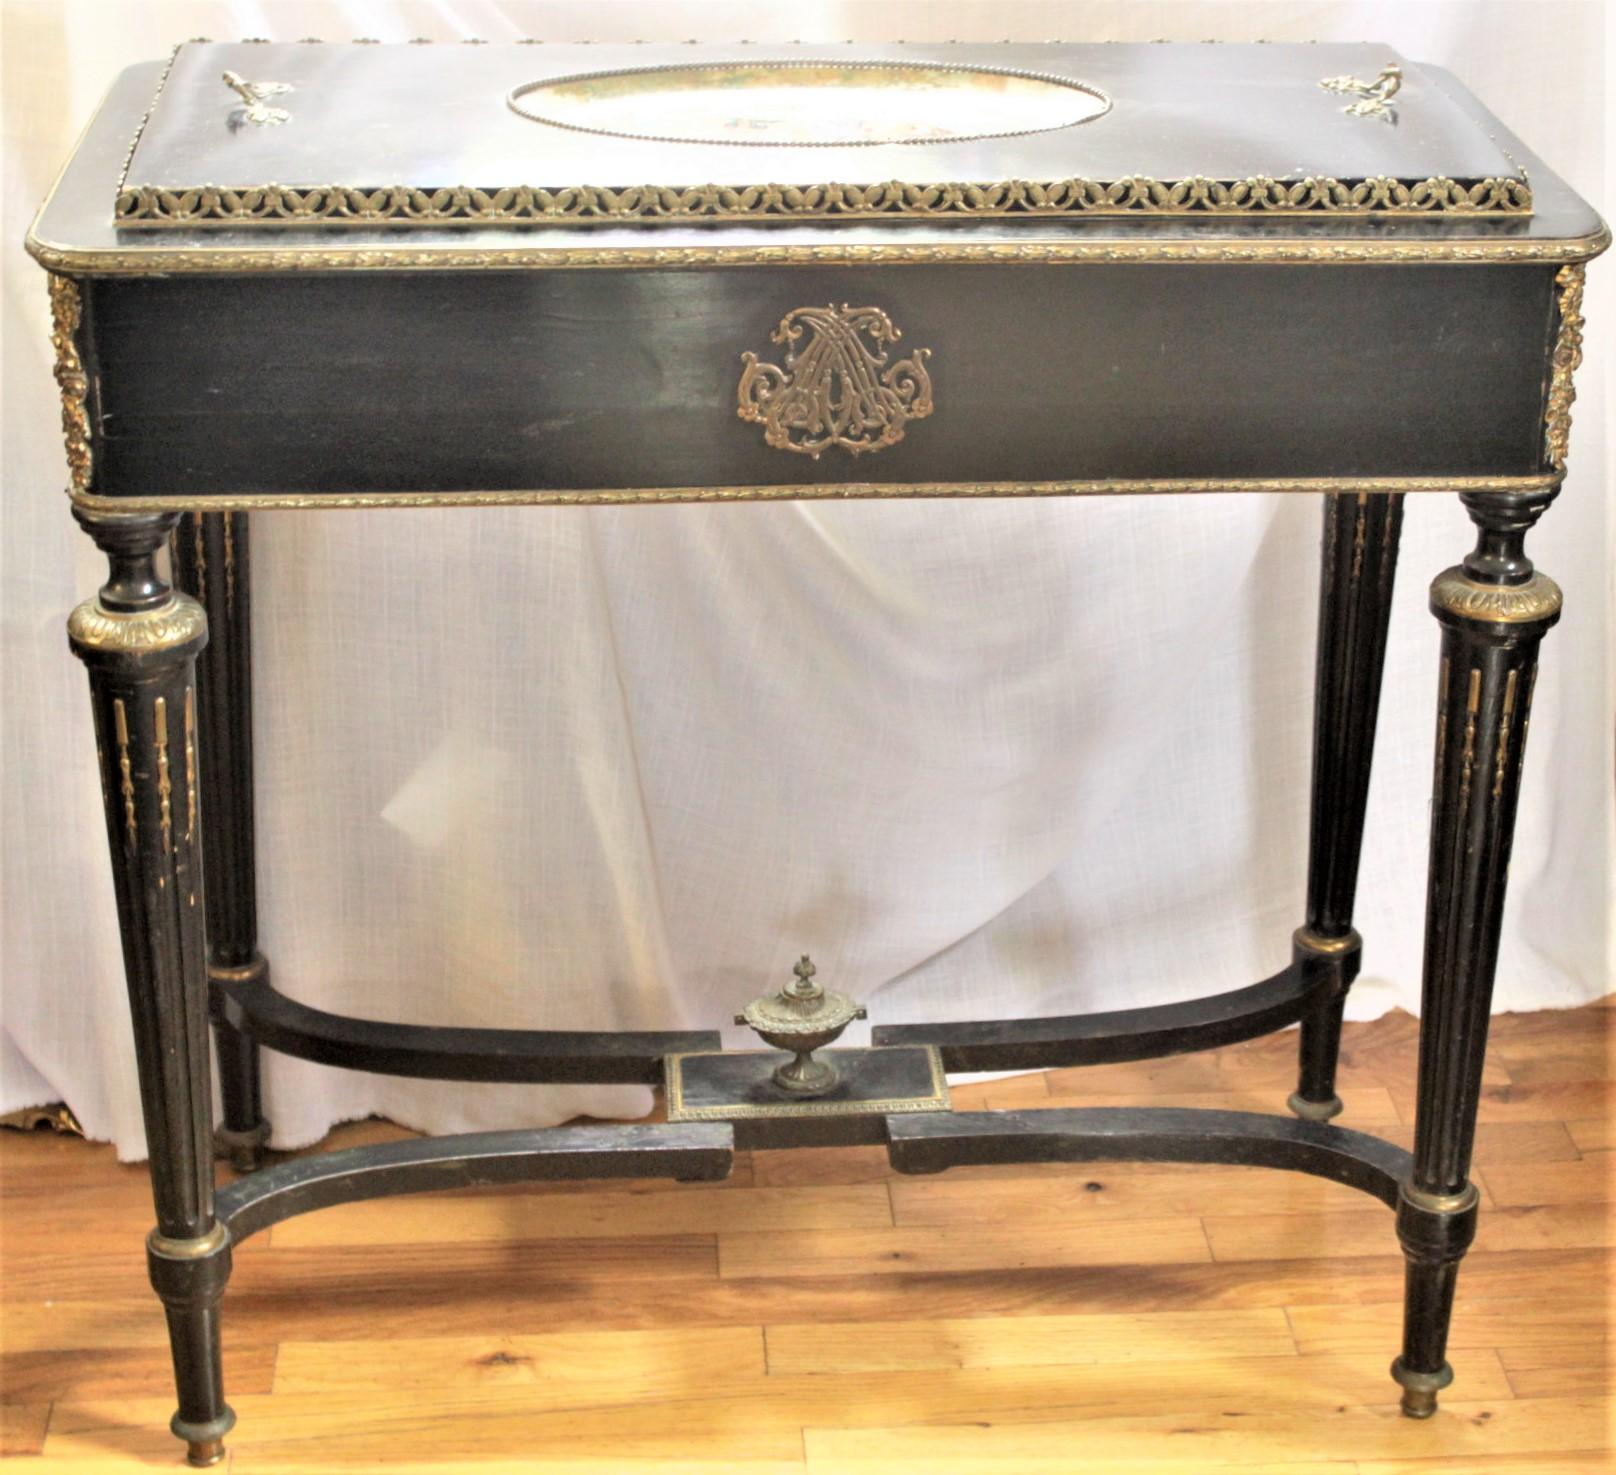 This antique jardinière table is unmarked, but presumed to have been made in England or France is circa 1890 in a Louis XVI style. The table is composed of wood which has been painted black with gold accents. The fitted top features a large oval